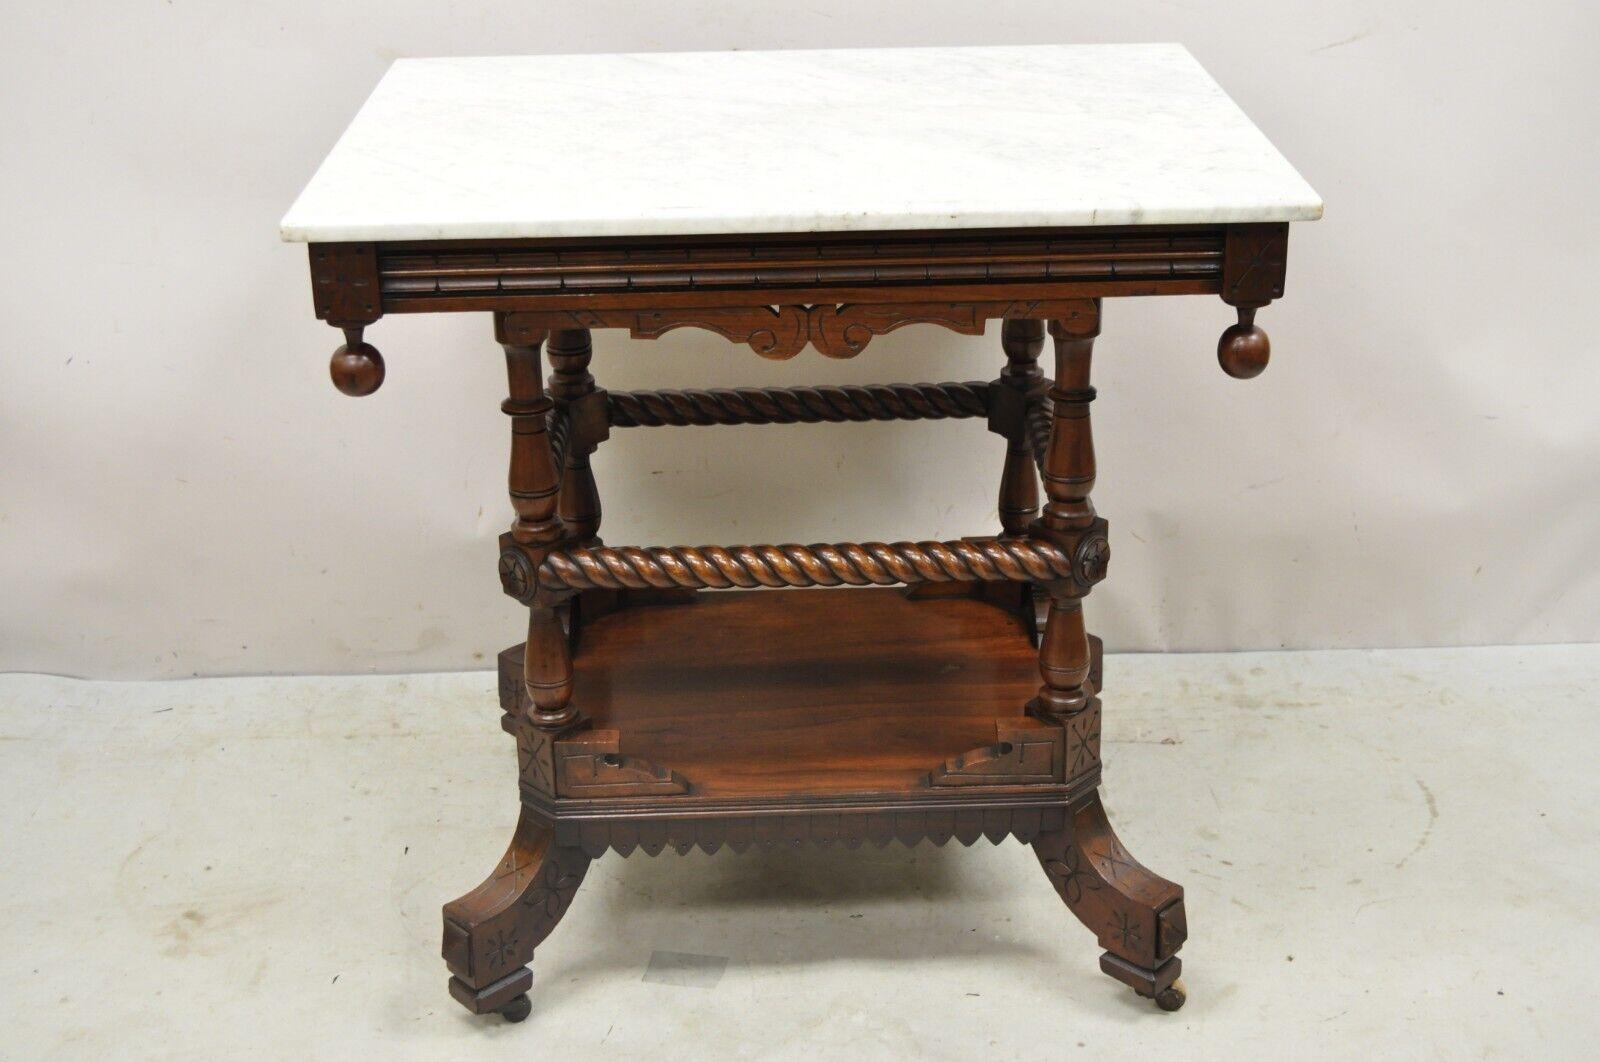 Antique Eastlake Victorian Spiral Carved Walnut Marble Top Two Tier Parlor Table. Item features a white marble top, spiral carved lower tier, rolling casters, ball form finials, very niec antique item. Circa 19th Century. Measurements: 29